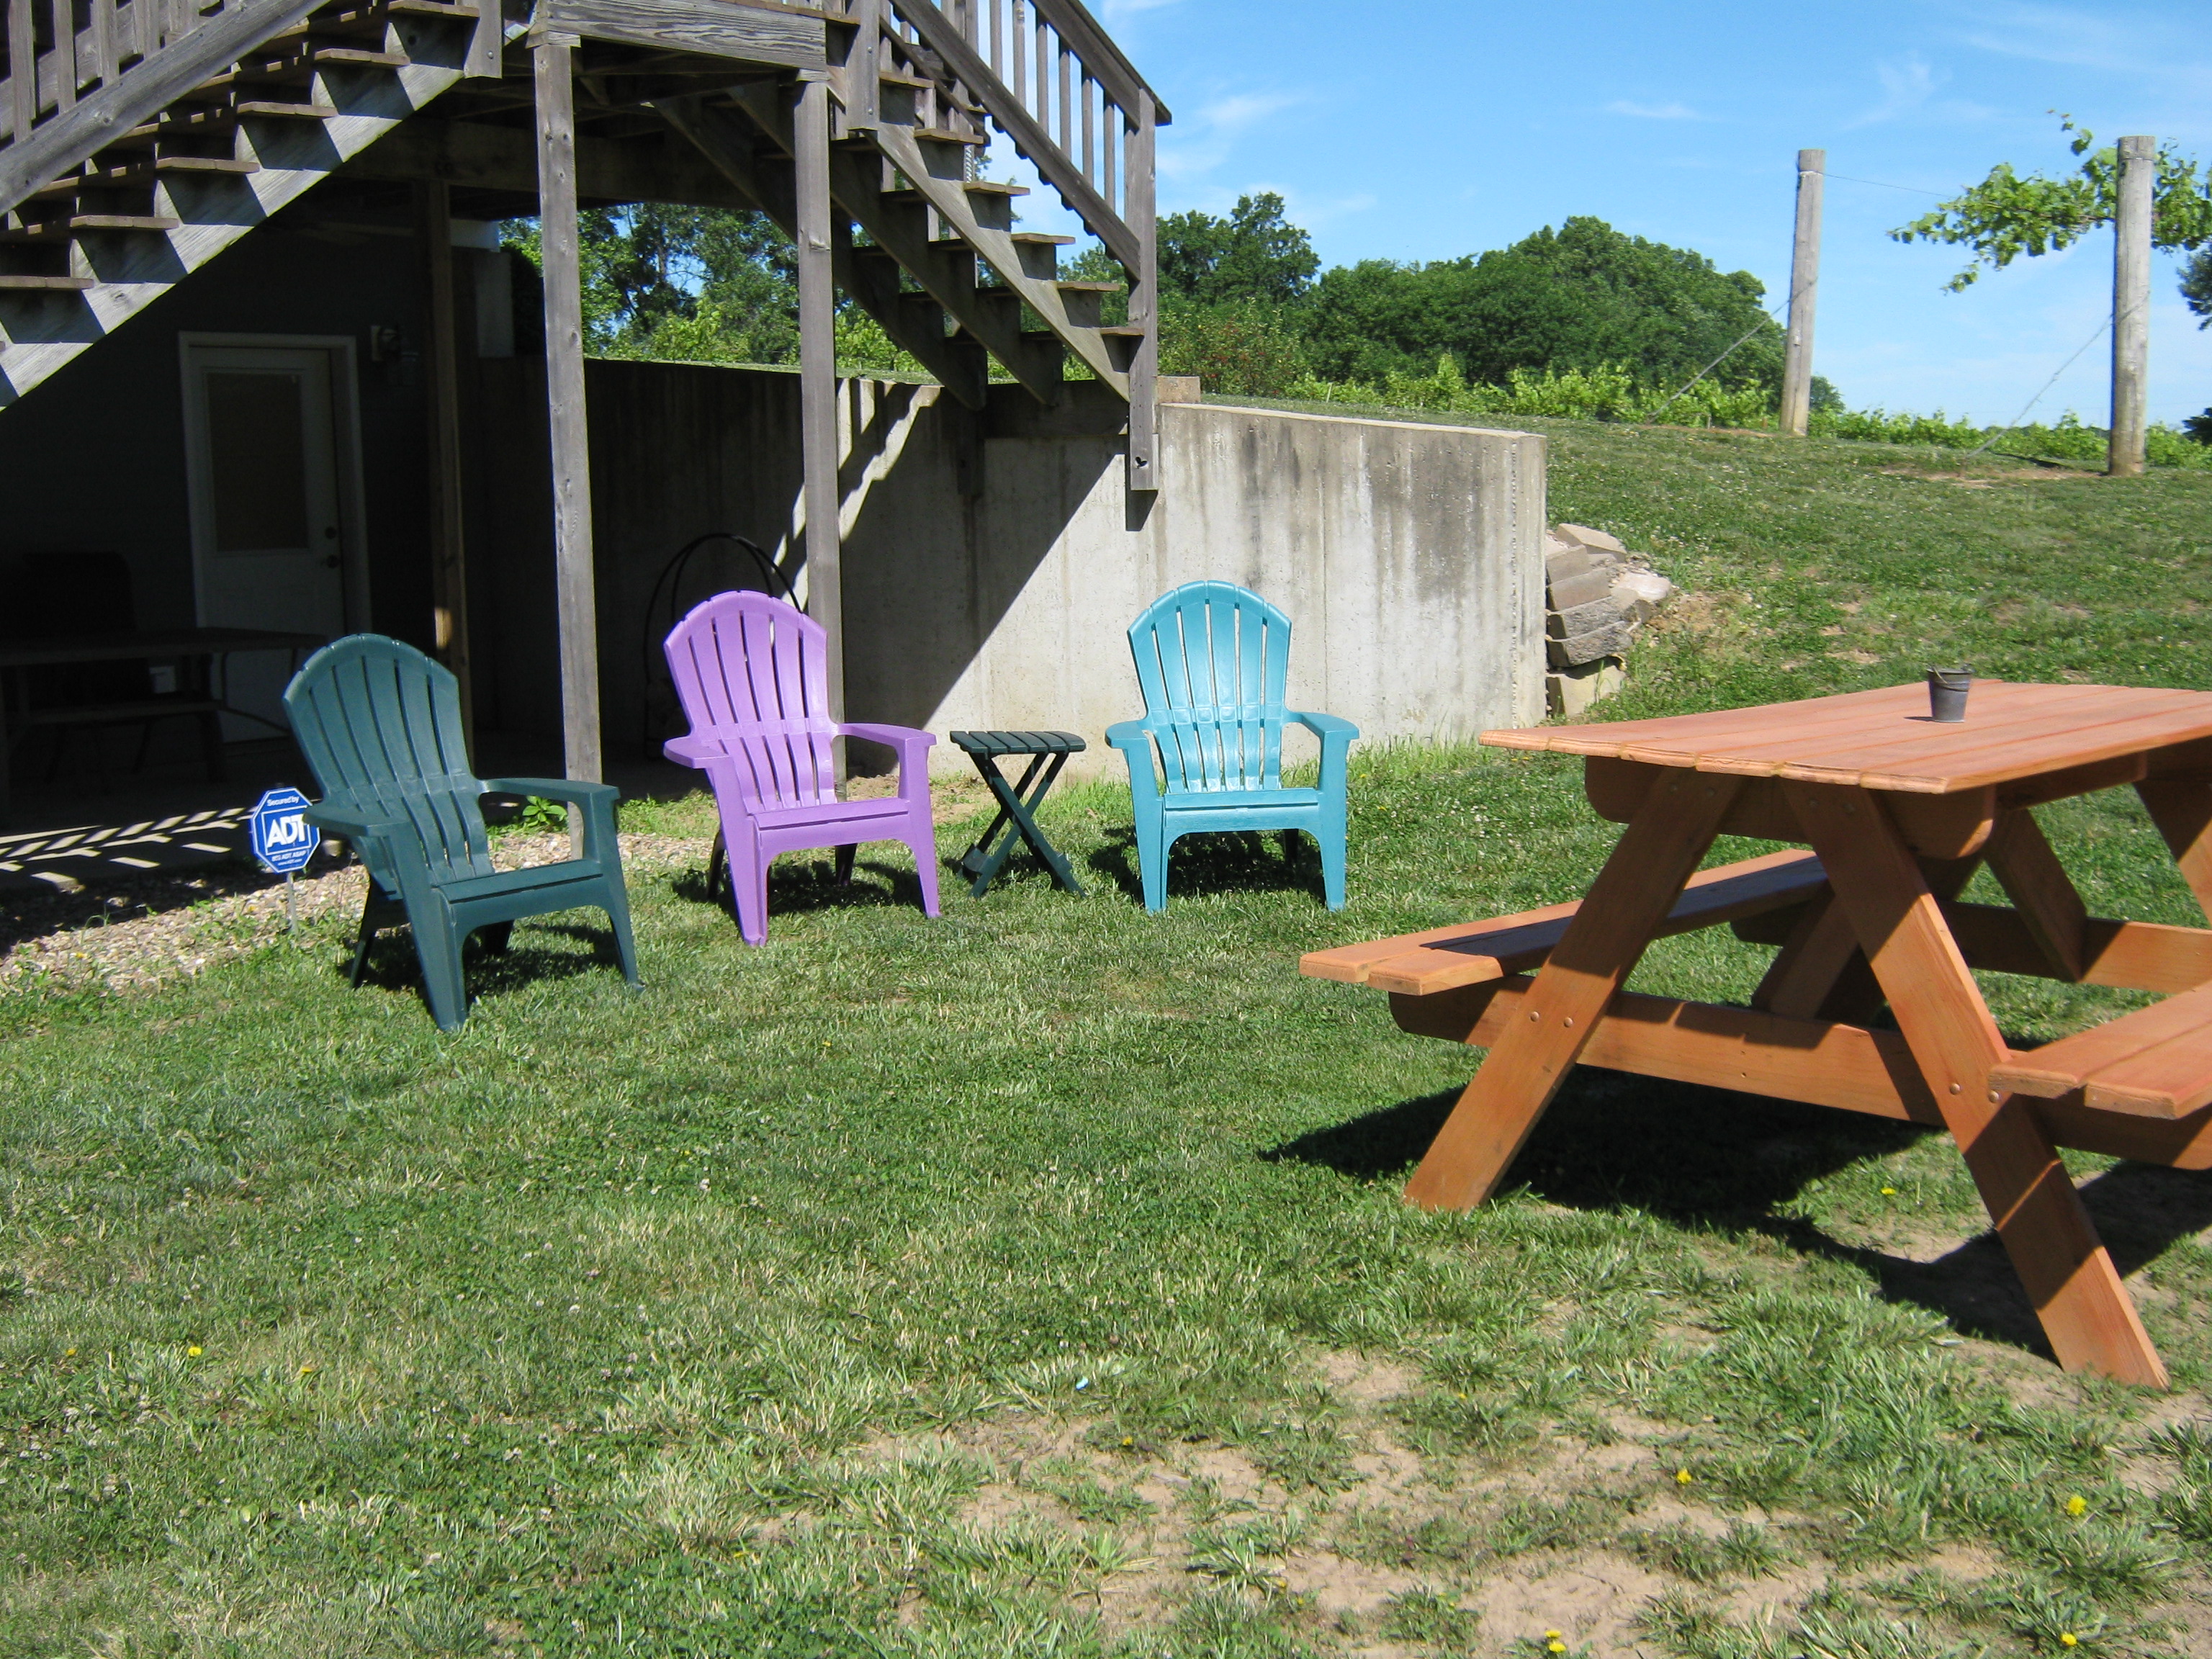 Hummingbird Vineyard and Winery- Outdoor seating. One picnic table and three colorful plastic lawn chairs.